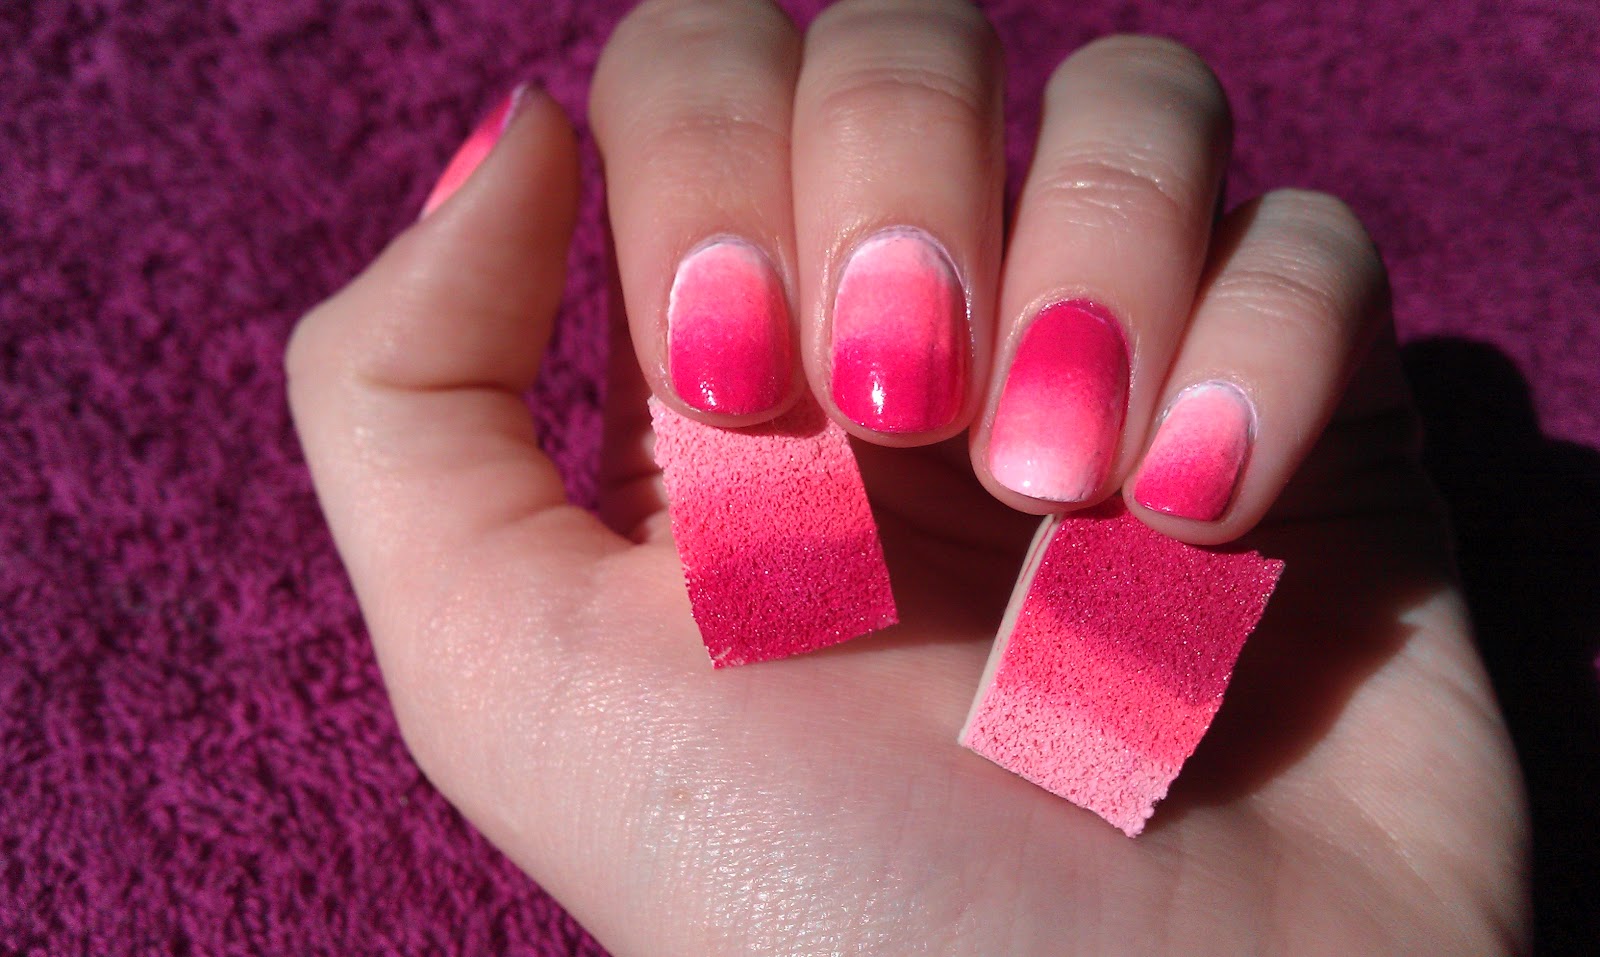 1. "Easy Ombre Nail Art Tutorial" - wide 7